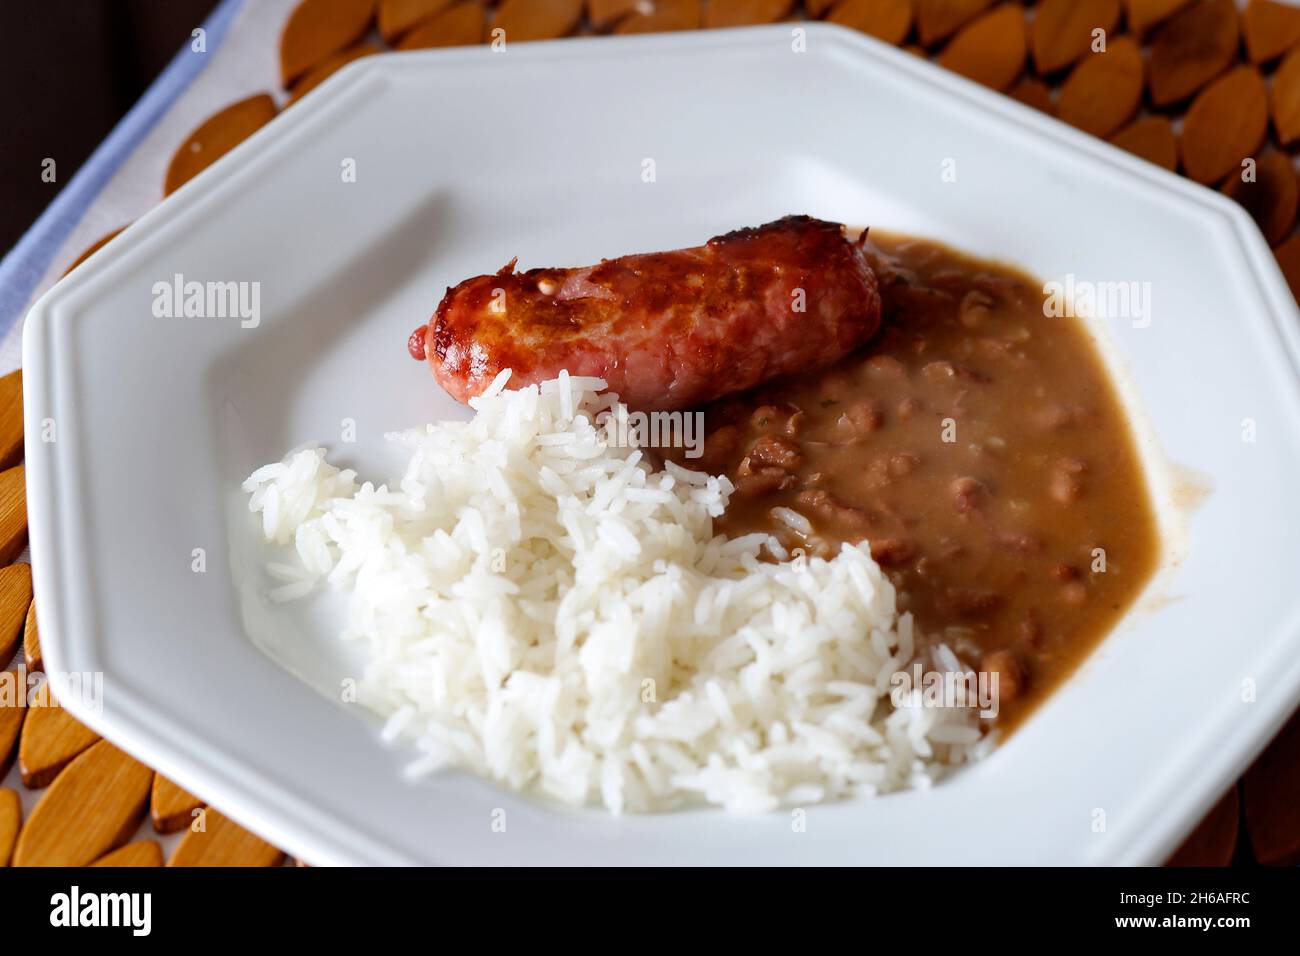 Ready-to-eat rice, beans and sausage on white plate Stock Photo